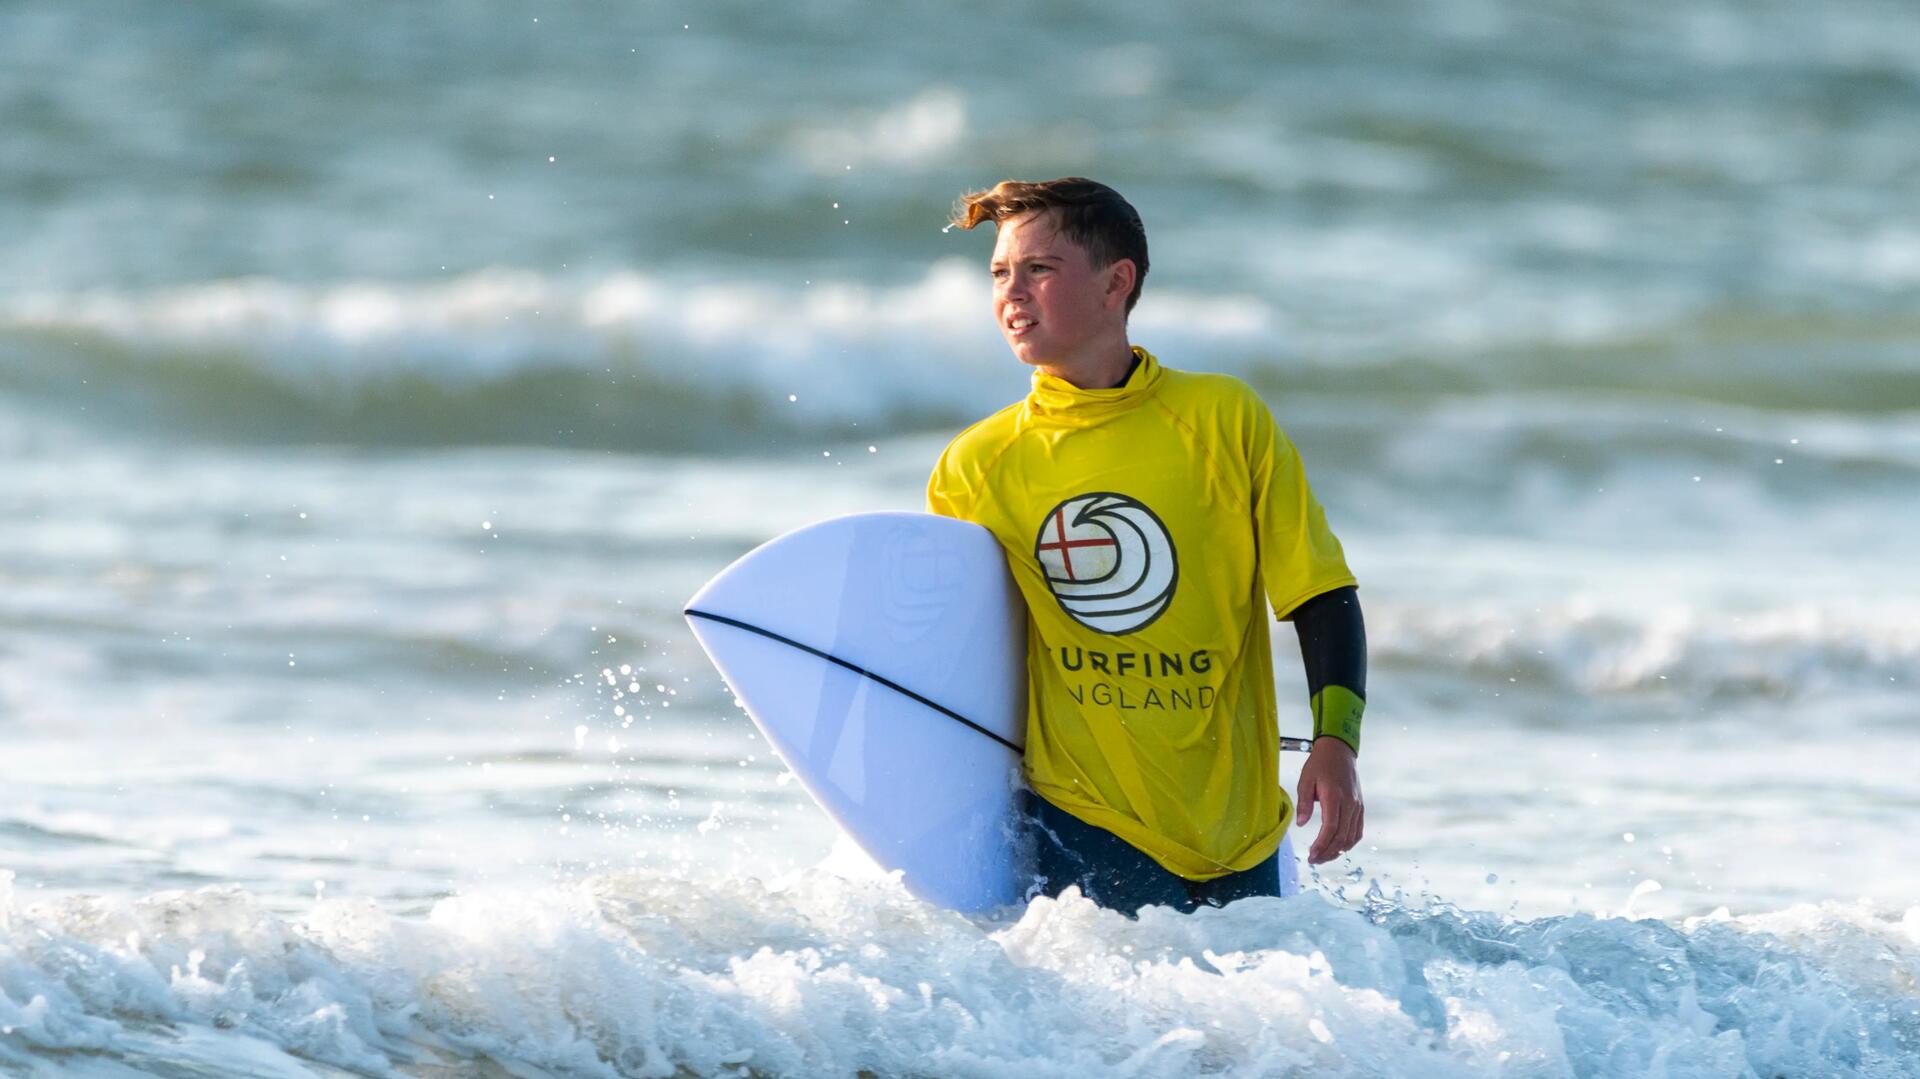 Young boy in the water, while carrying his surfboard.